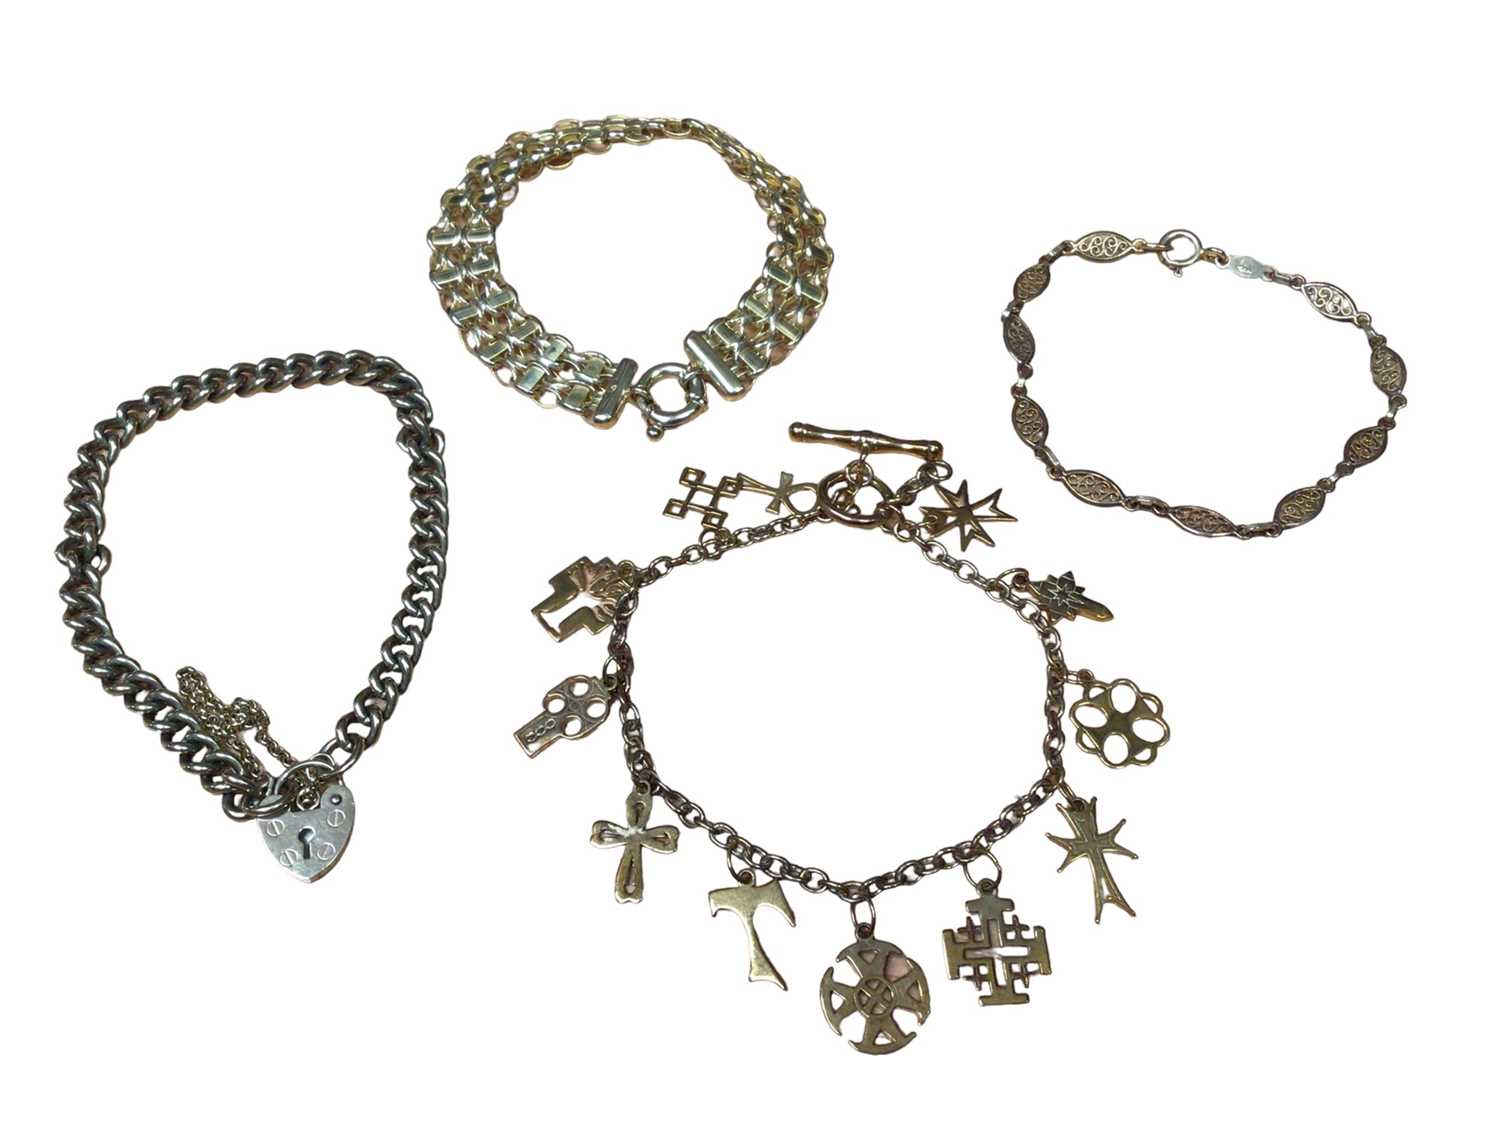 Lot 180 - 9ct gold charm bracelet, 9ct gold curb link bracelet with padlock clasp and two other 9ct gold bracelets (4)